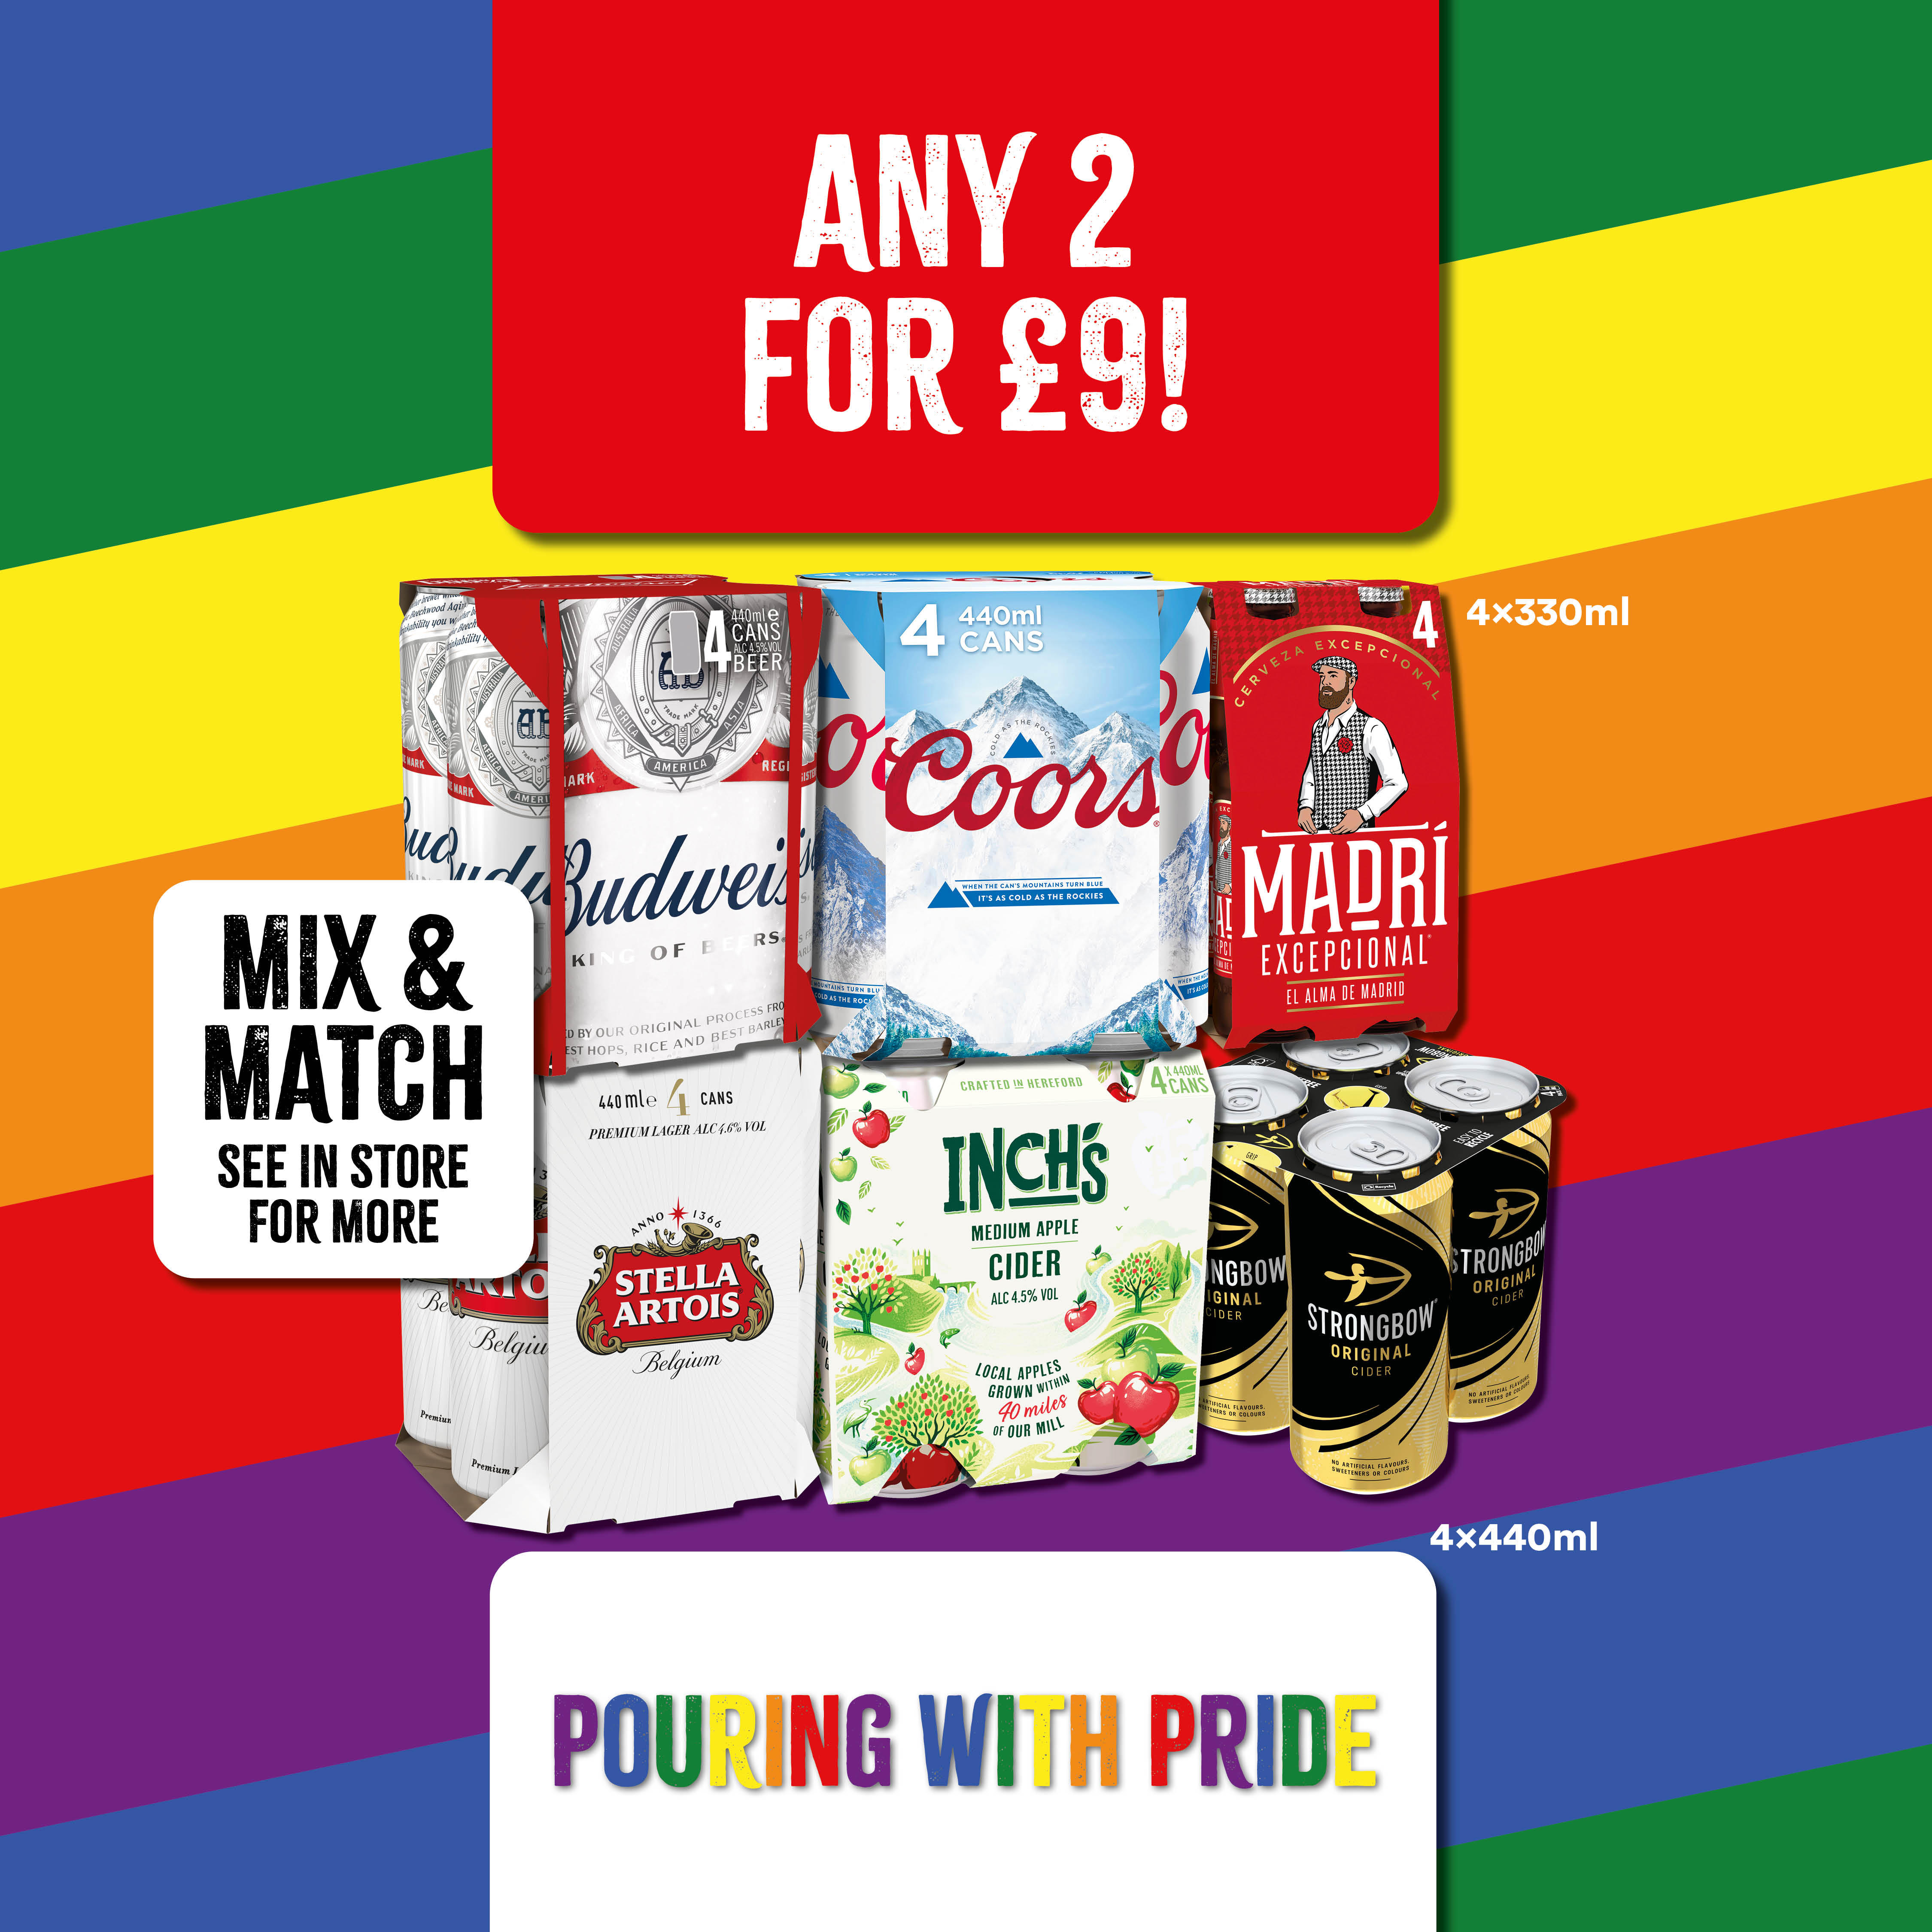 Any 2 for £9 Budweiser, Coors and Madri - 4 x 330ml 
Stella Artois, Inchs and Strongbow Original 4 x Bargain Booze Whitby 01947 820737